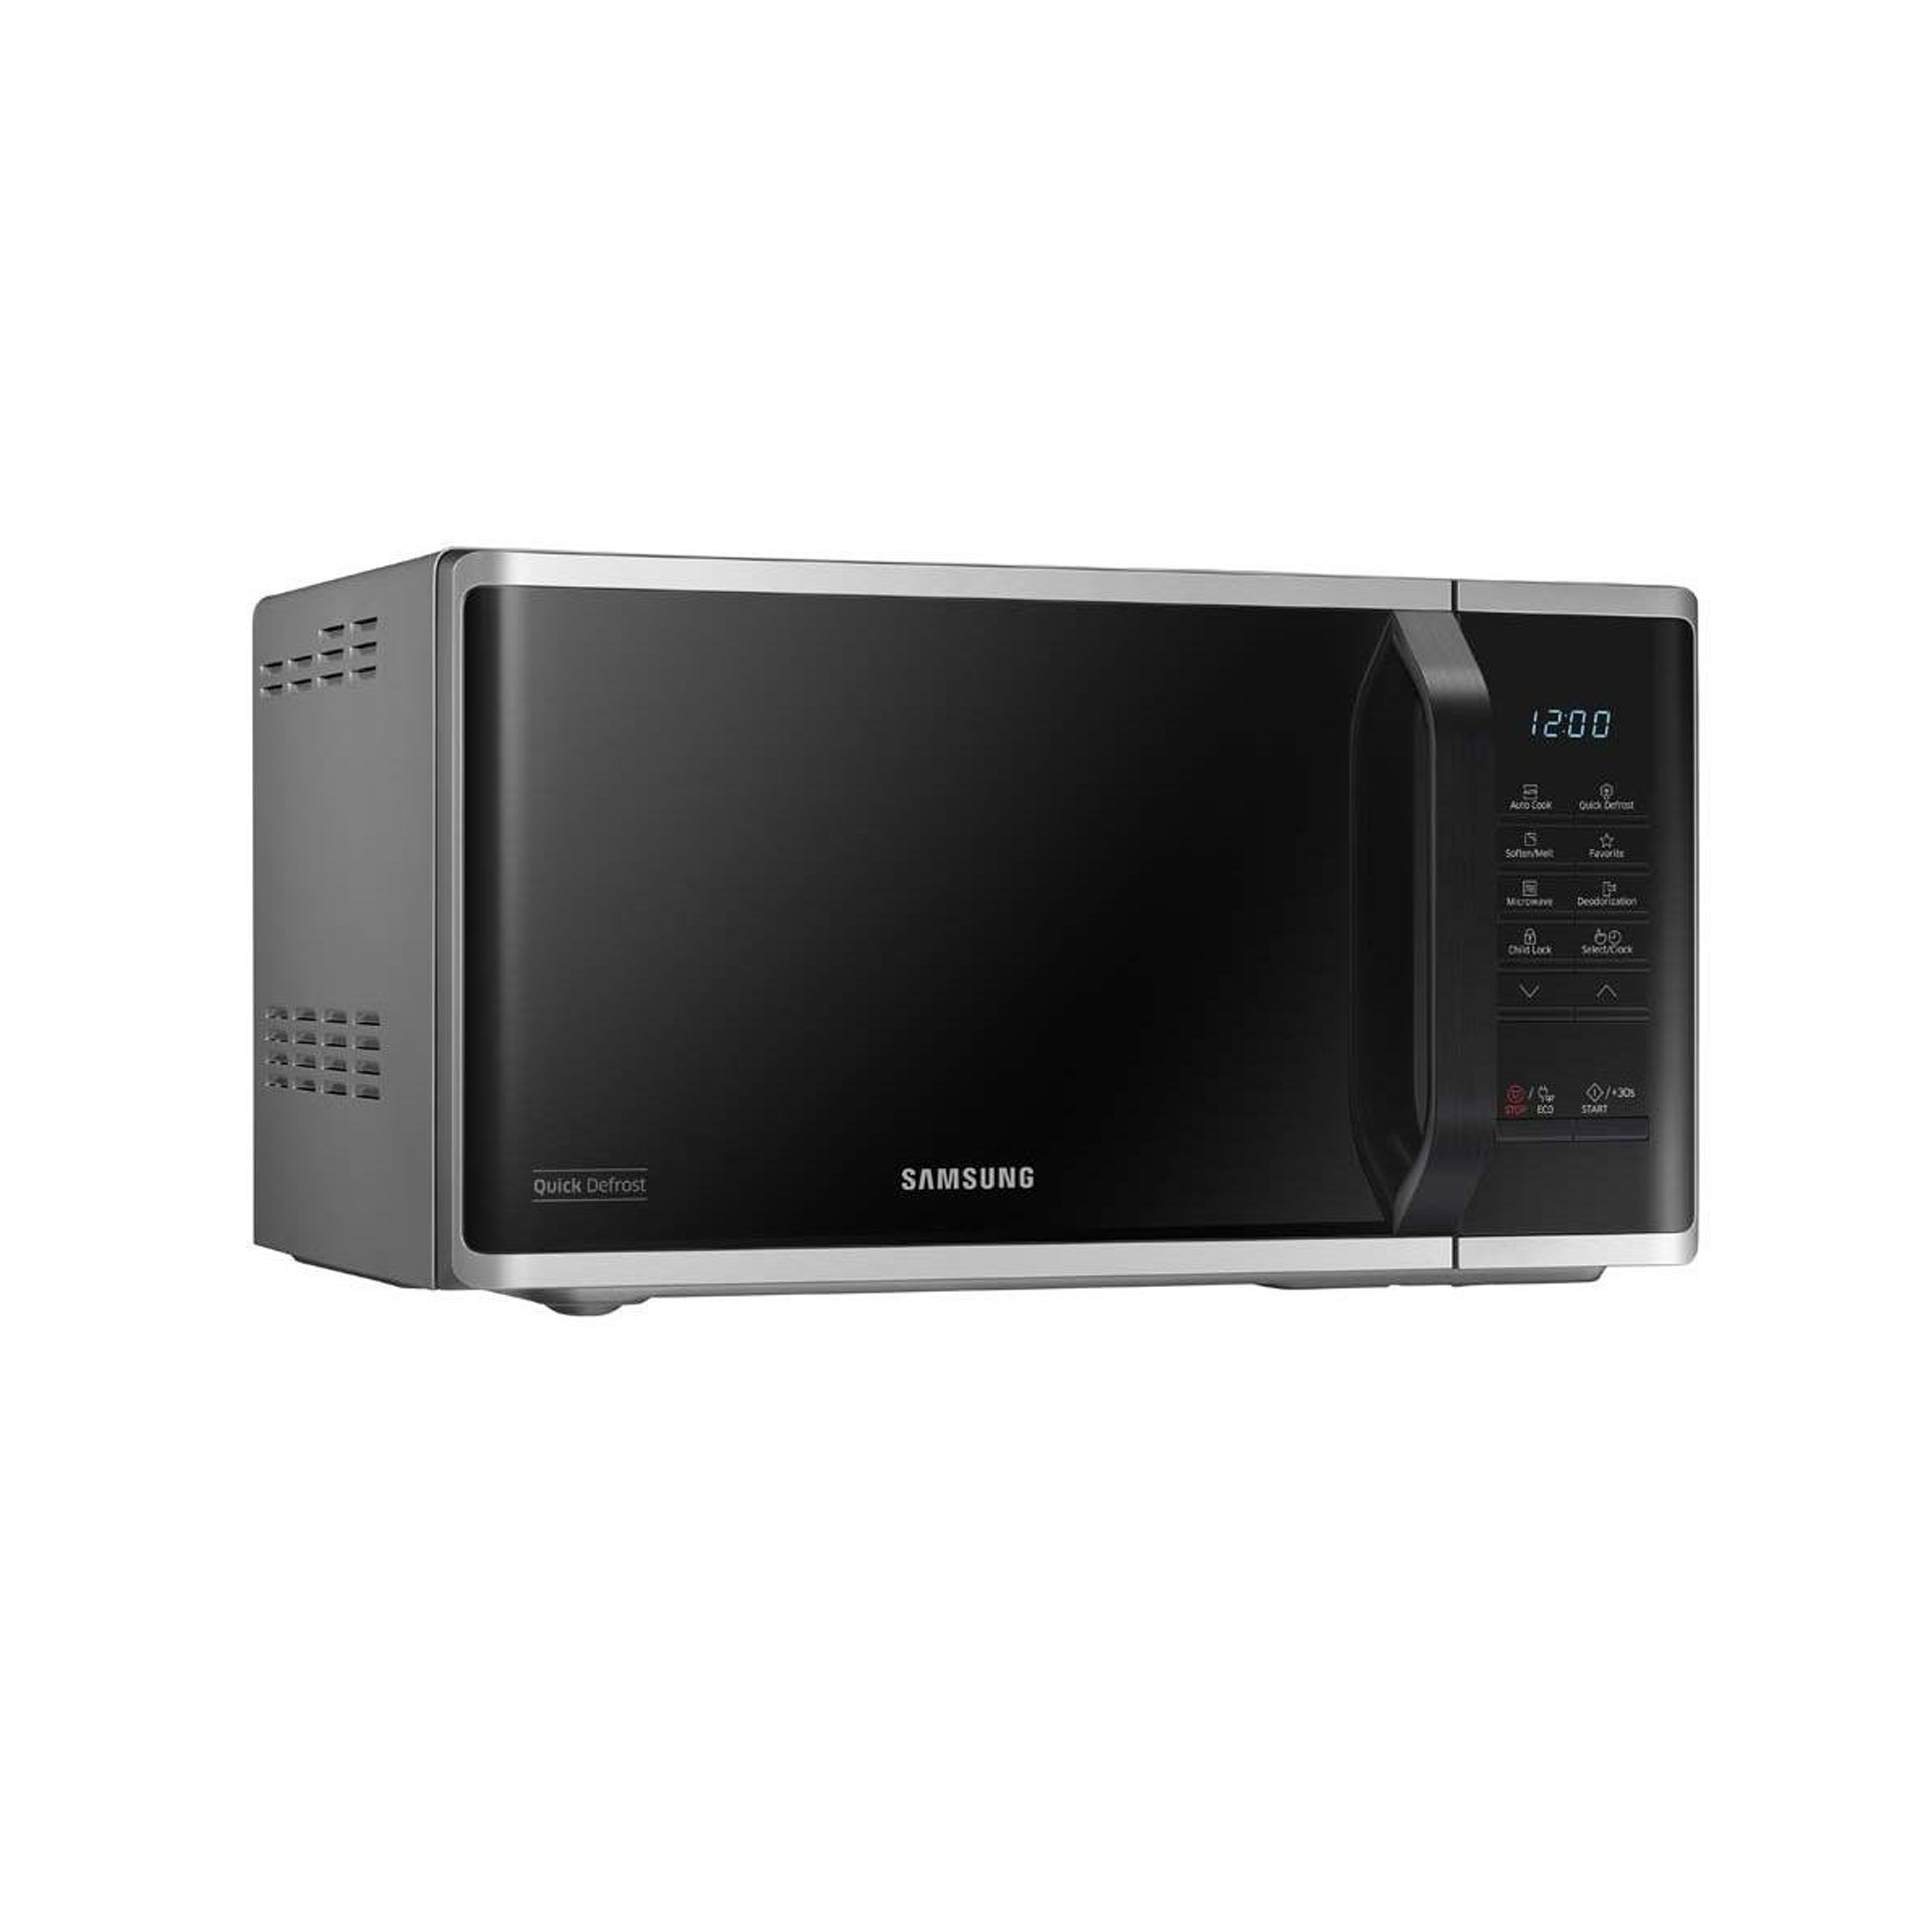 Samsung 23L 800W Microwave Oven MS23K3513AS - Gimmie